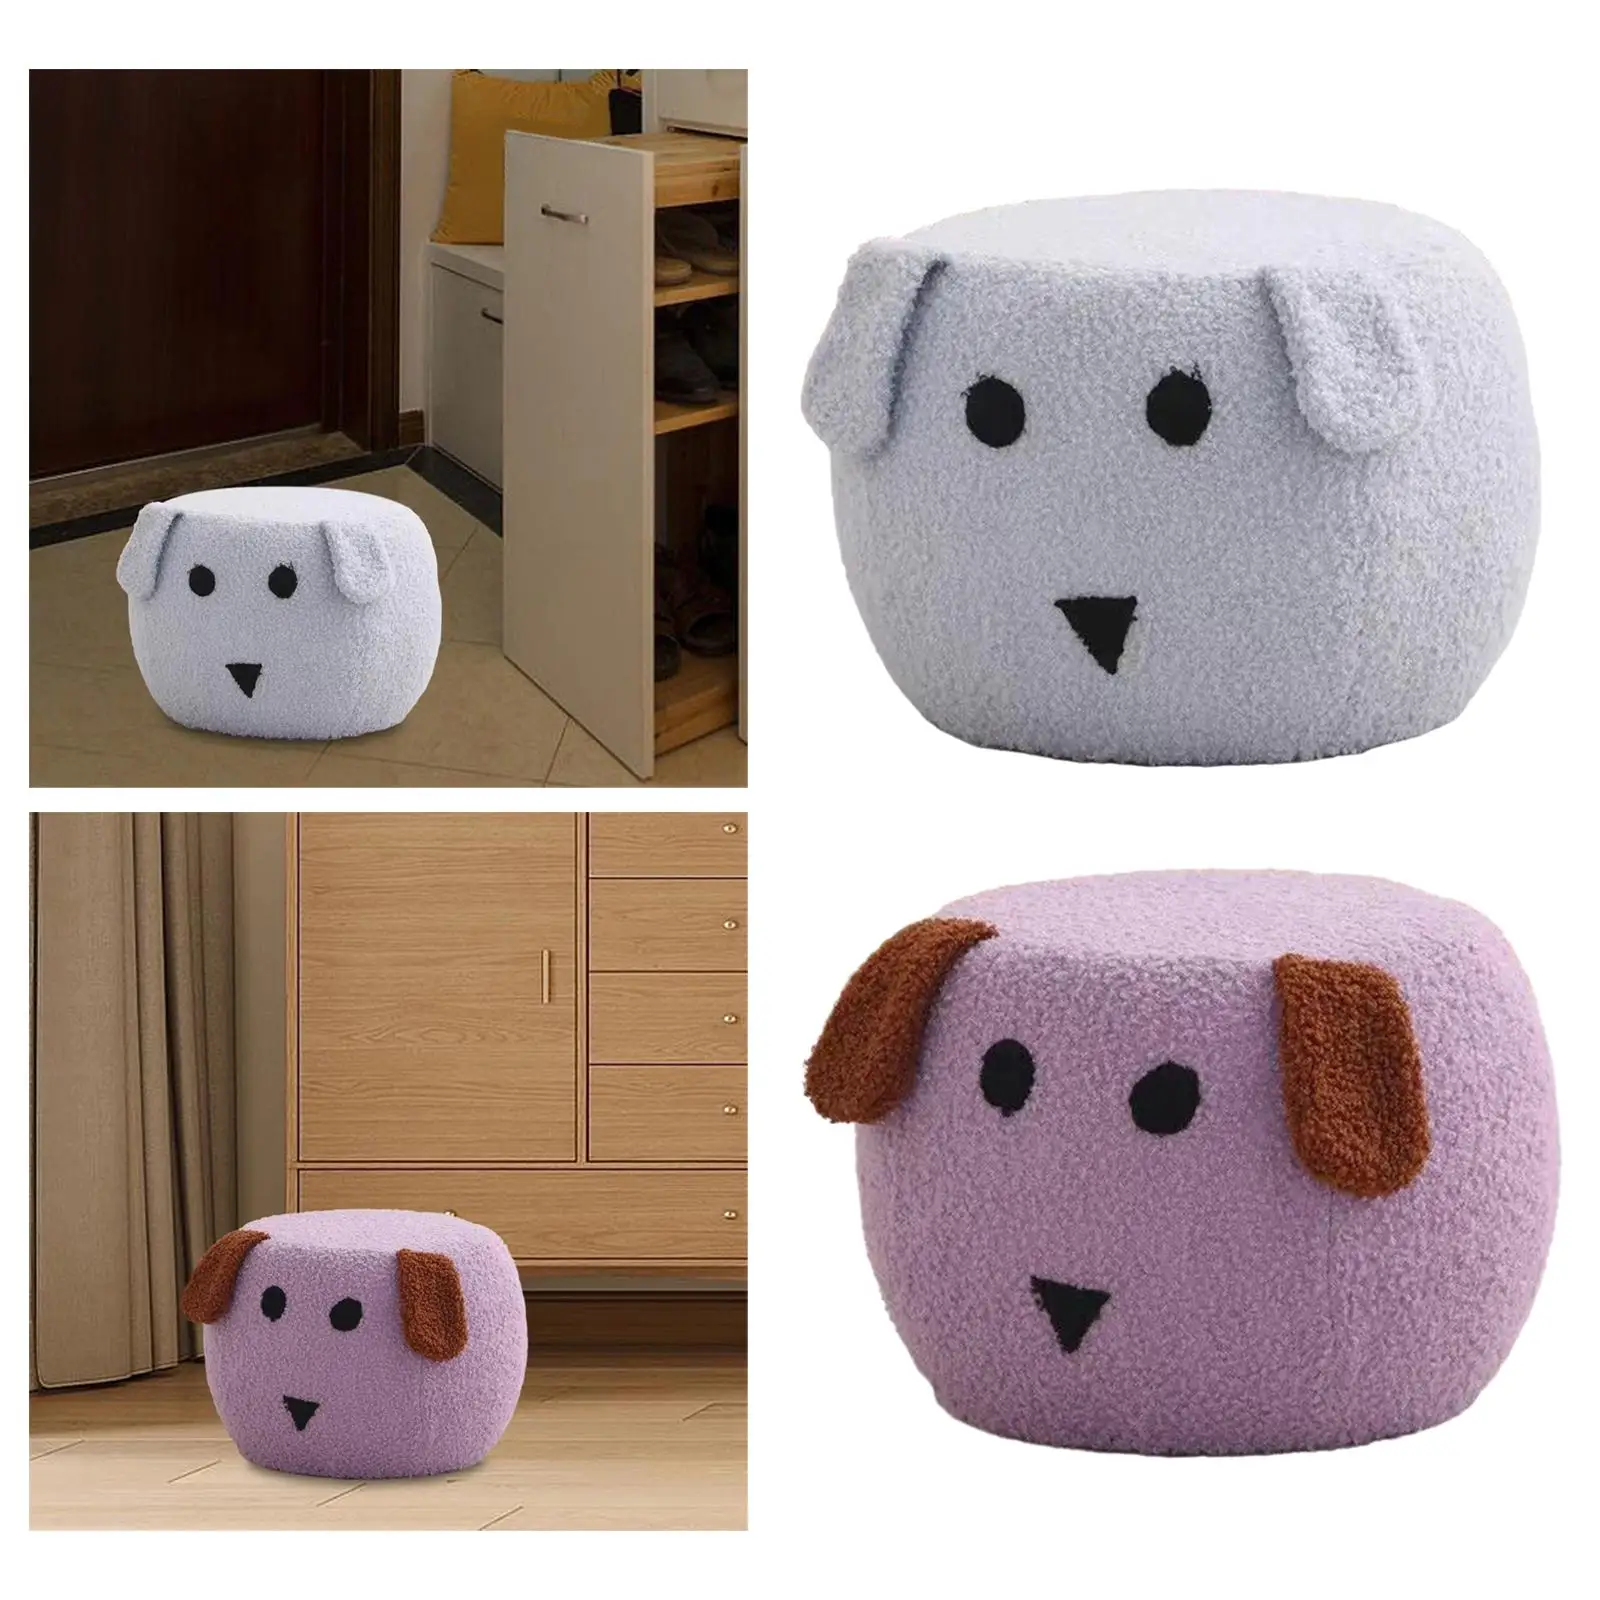 Small Footstool Cute Dog Shape Footrest Stool Creative Stool Padded Seat Ottomans for Living Room Office Home Nursery Bedside